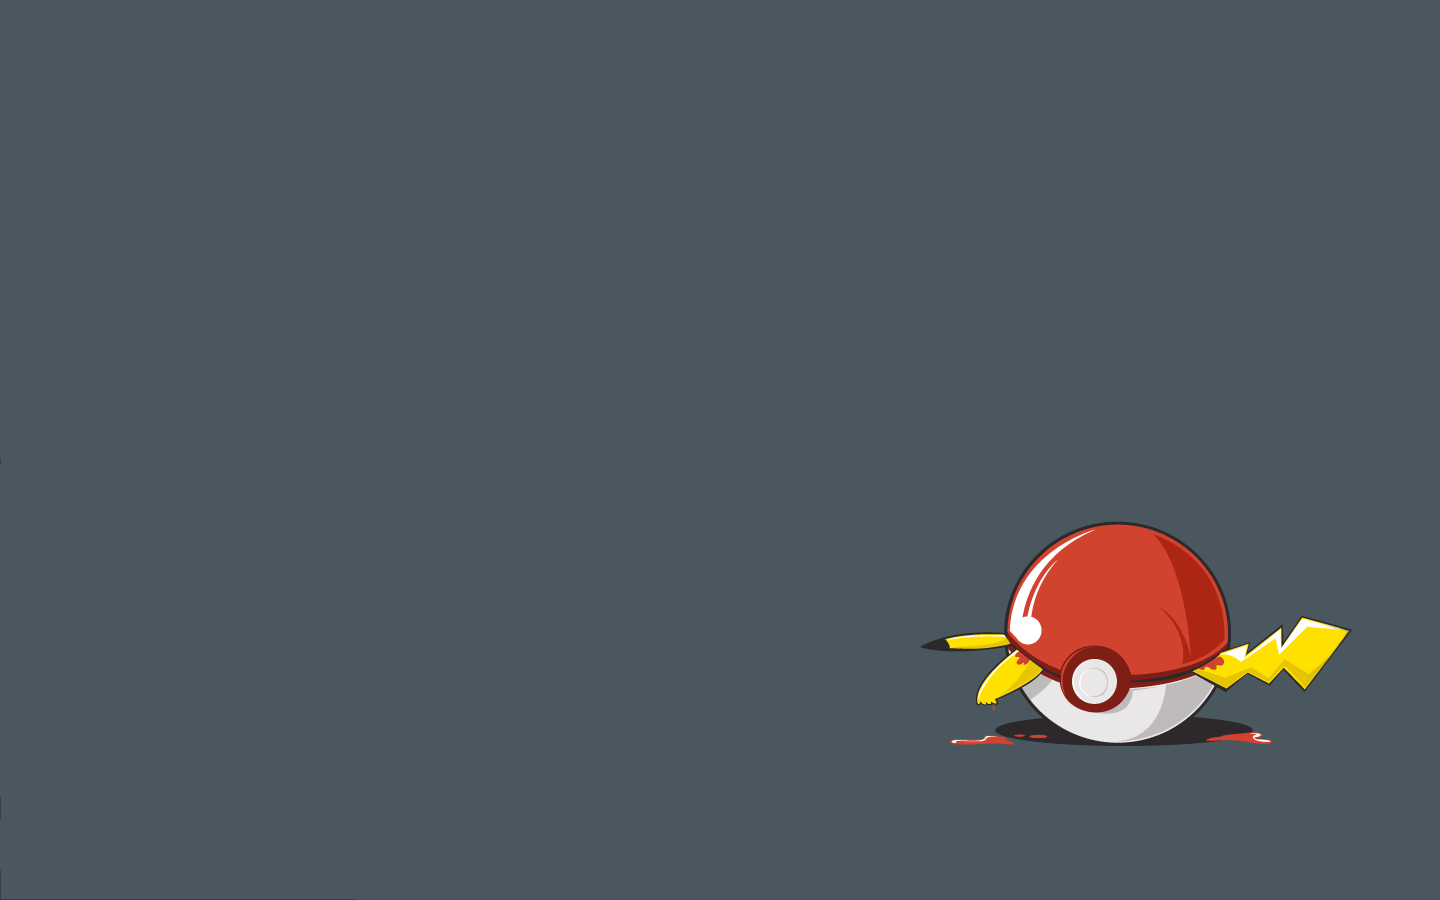 Red (Pokémon) - Desktop Wallpapers, Phone Wallpaper, PFP, Gifs, and More!